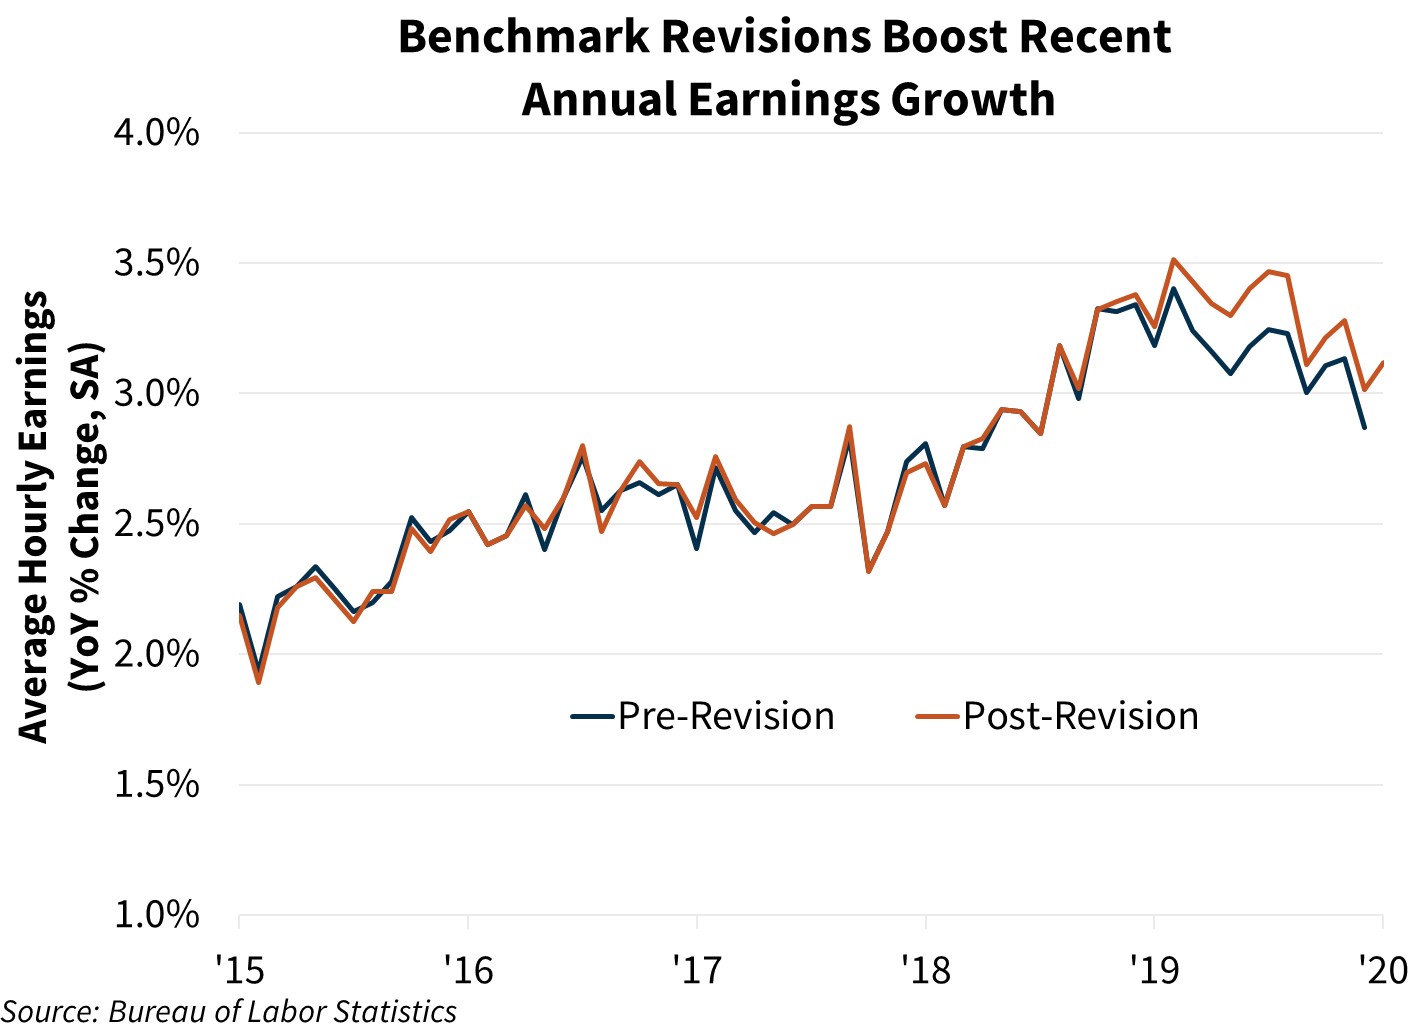 Benchmark Revisions Boost Recent Annual Earnings Growth